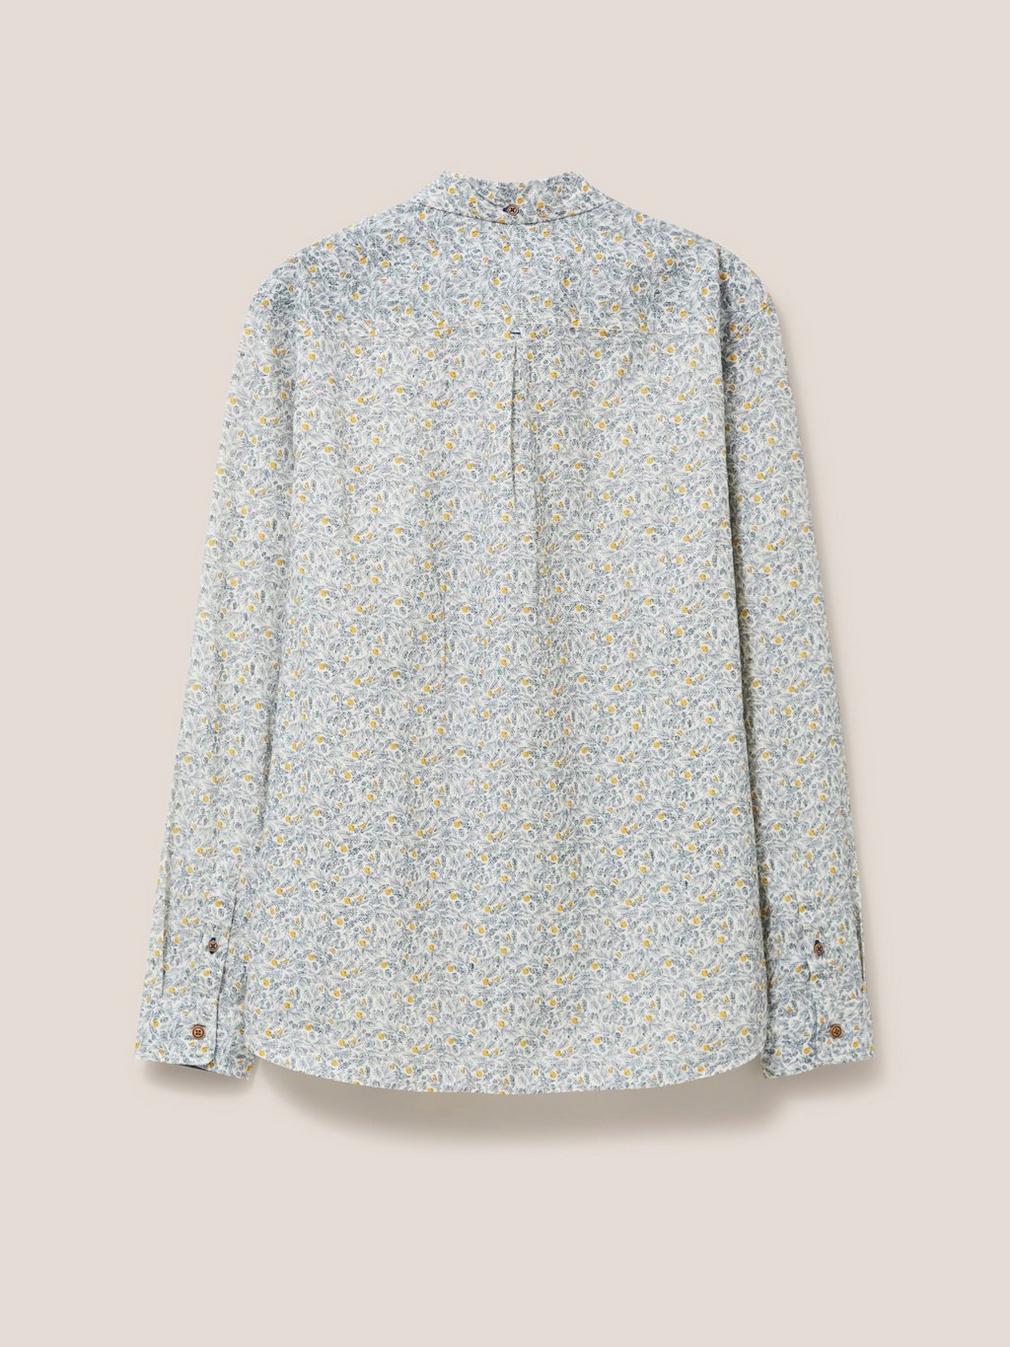 Clementine Print Shirt in IVORY MLT - FLAT BACK